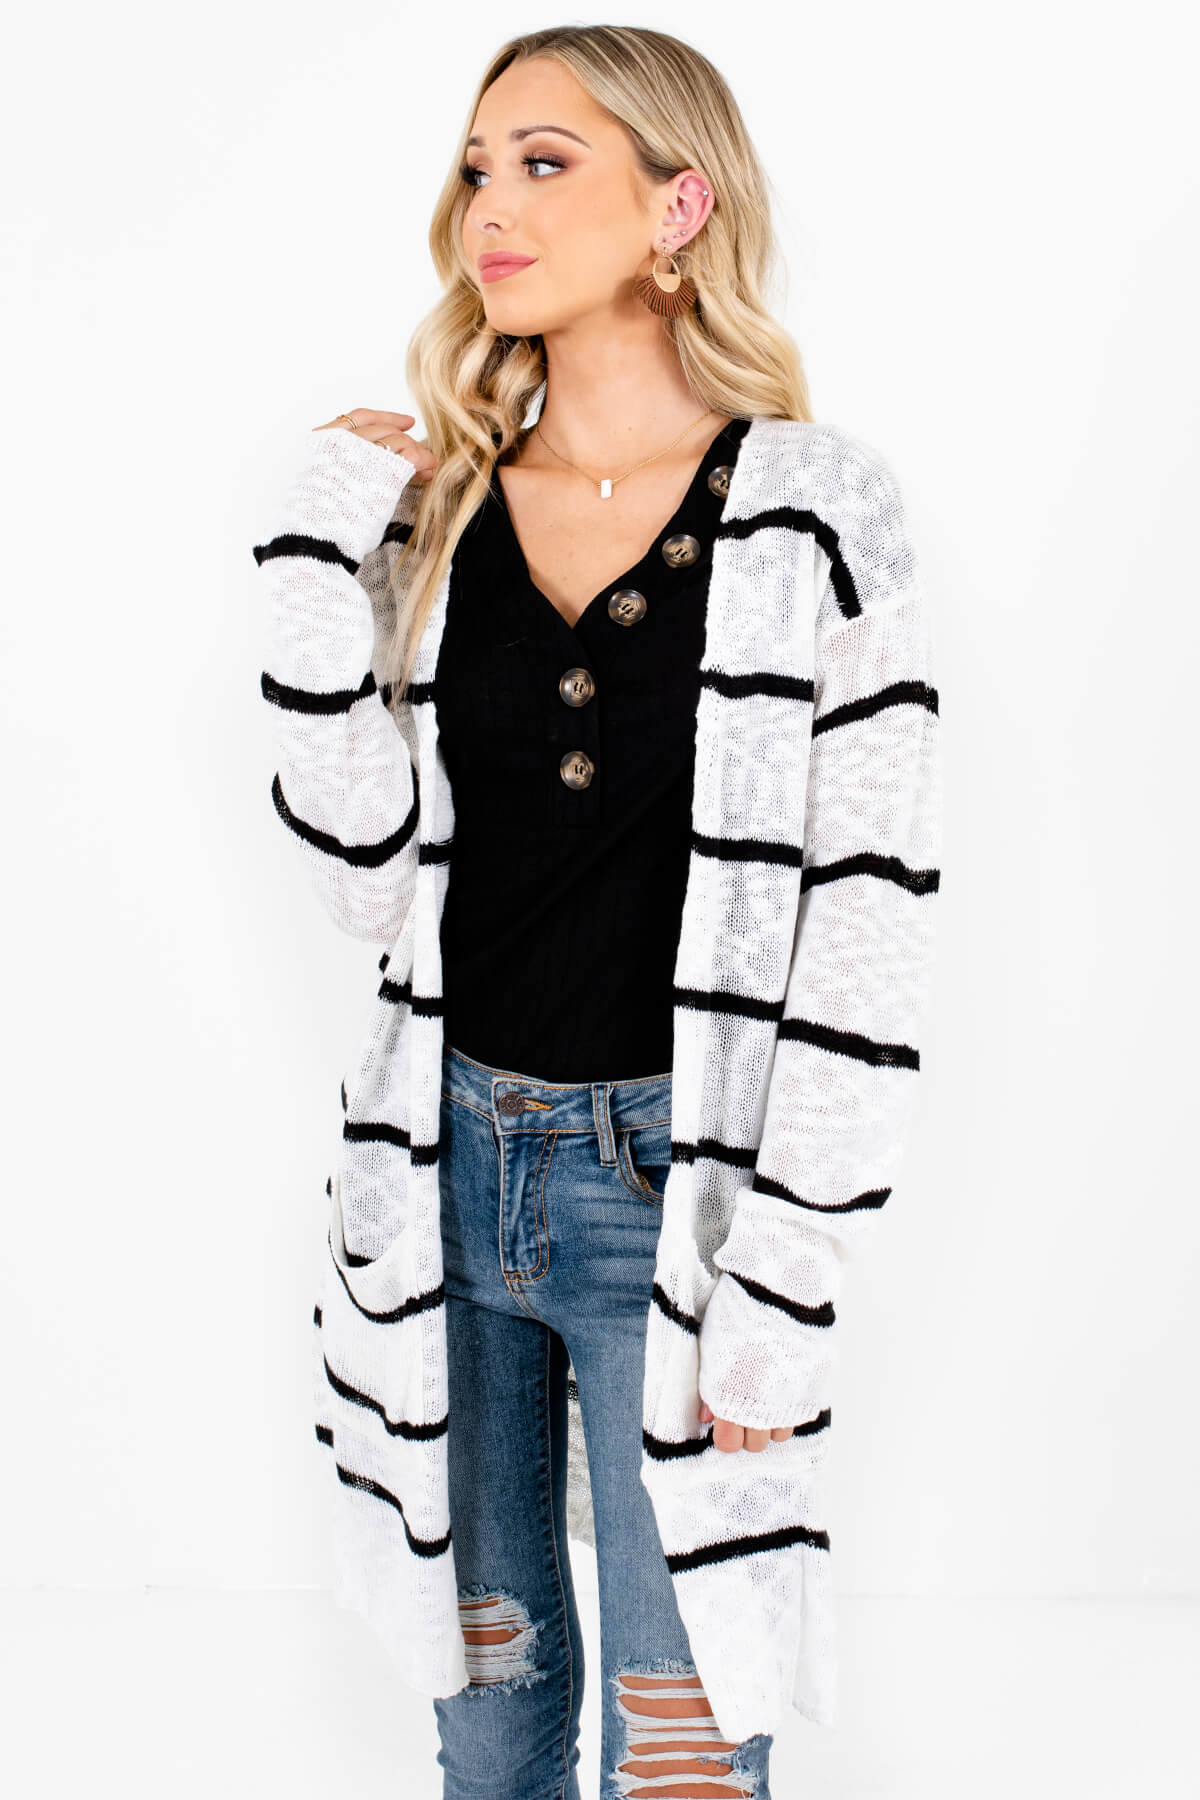 Casual Day Modal Cardigan in Black and White Stripe - ShopperBoard